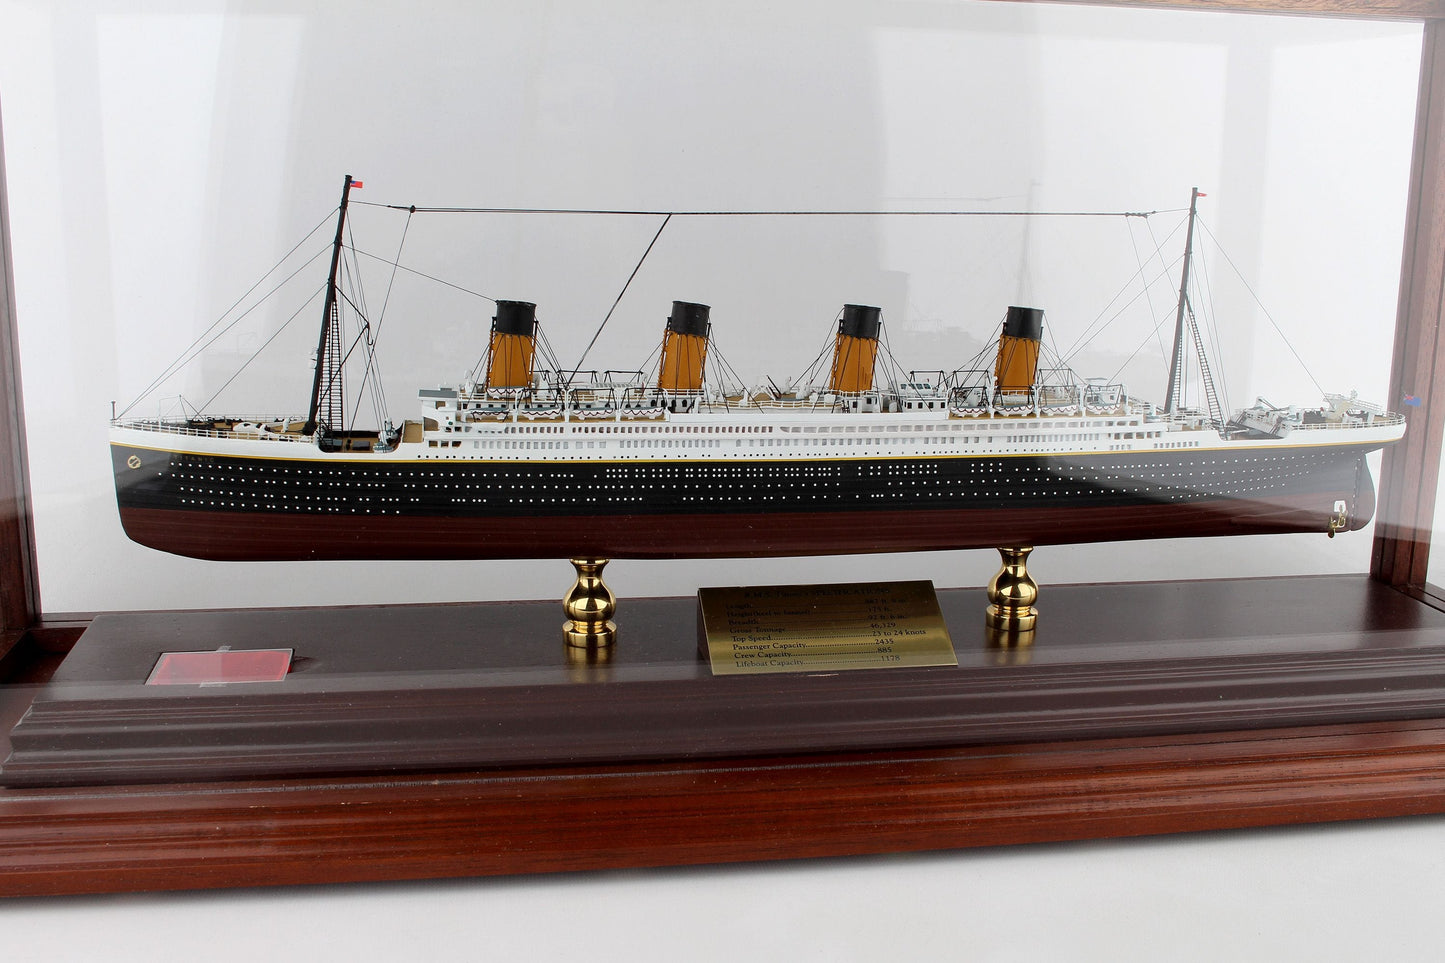 ALDO Hobbies & Creative Arts> Collectibles> Scale Model RMS Titanic medium Passenger Ship Ocean Liner Wood Model Assembled With Display Case and Real Artifact From the Ship